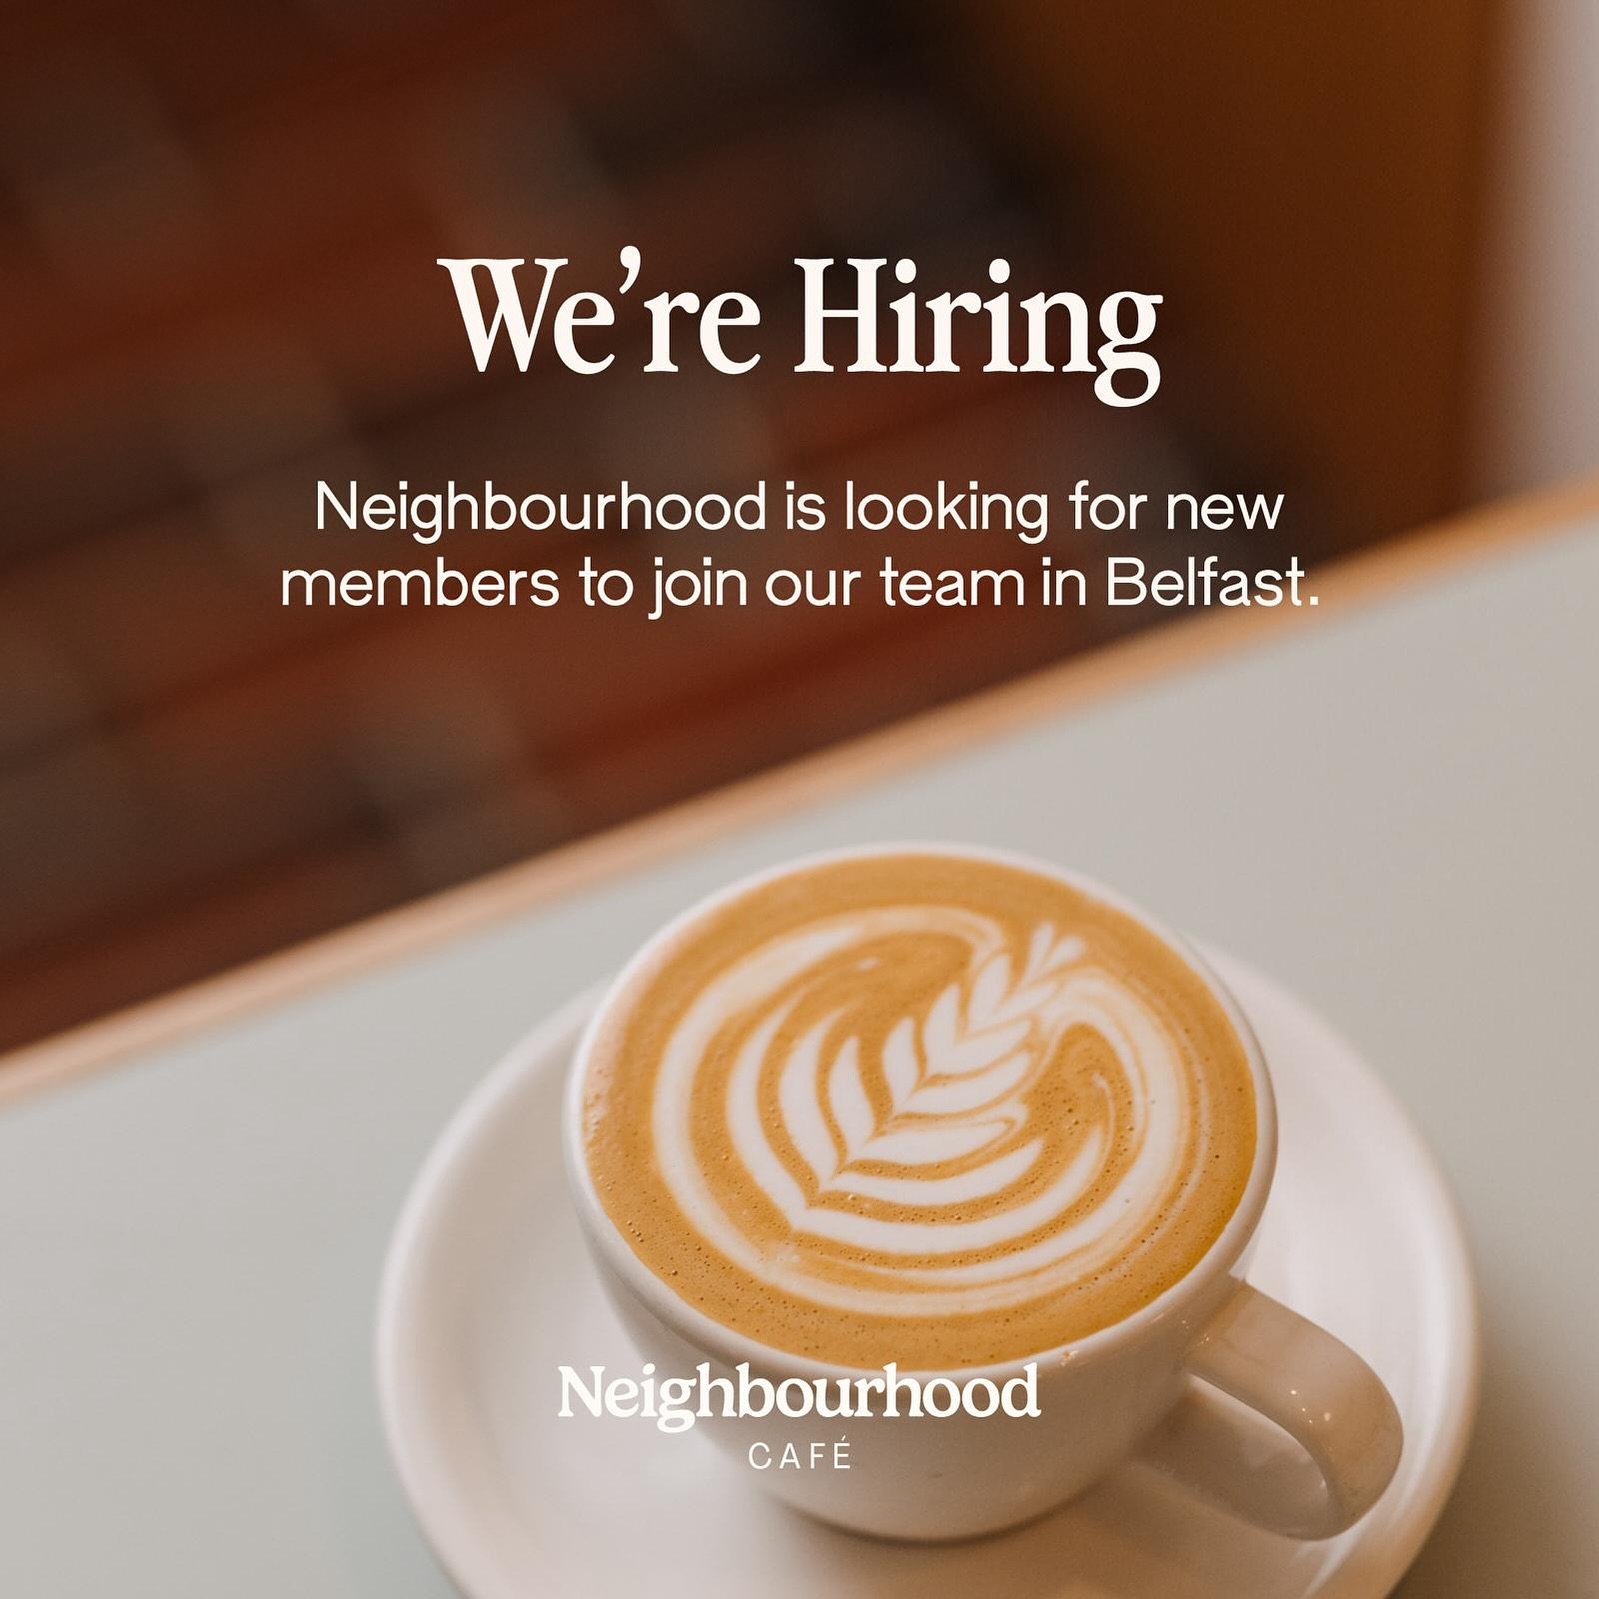 Neighbourhood is looking for passionate baristas &amp; senior chefs with a positive attitude and a willingness to work as part of enthusiastic team. The right candidate should work well in a fast-paced environment, ensuring an excellent guest experie